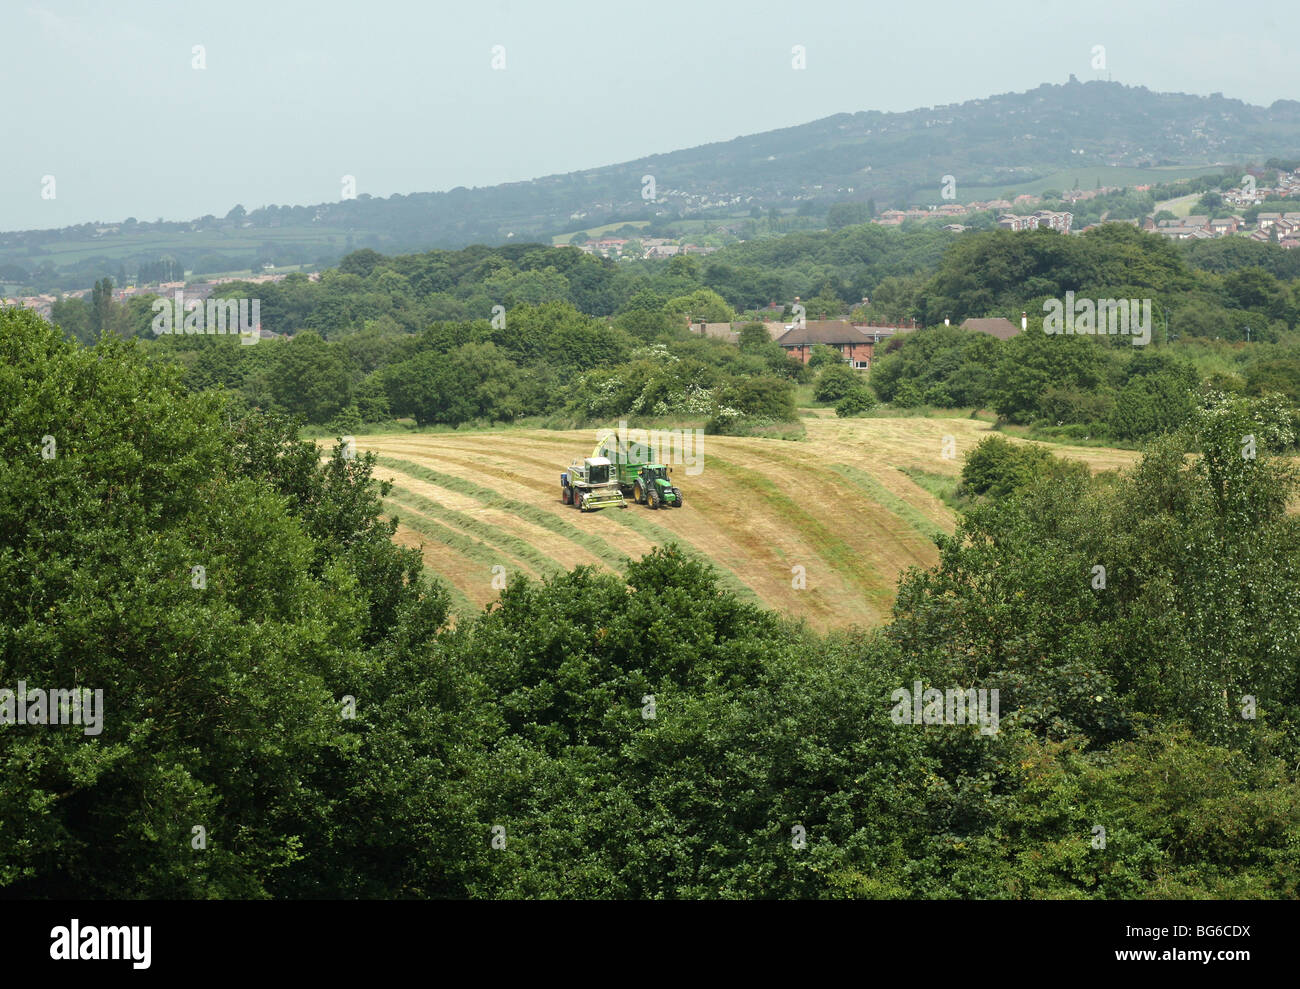 A tractor and a harvester gathering silage in a field with Mow Cop castle folly in the background Stock Photo